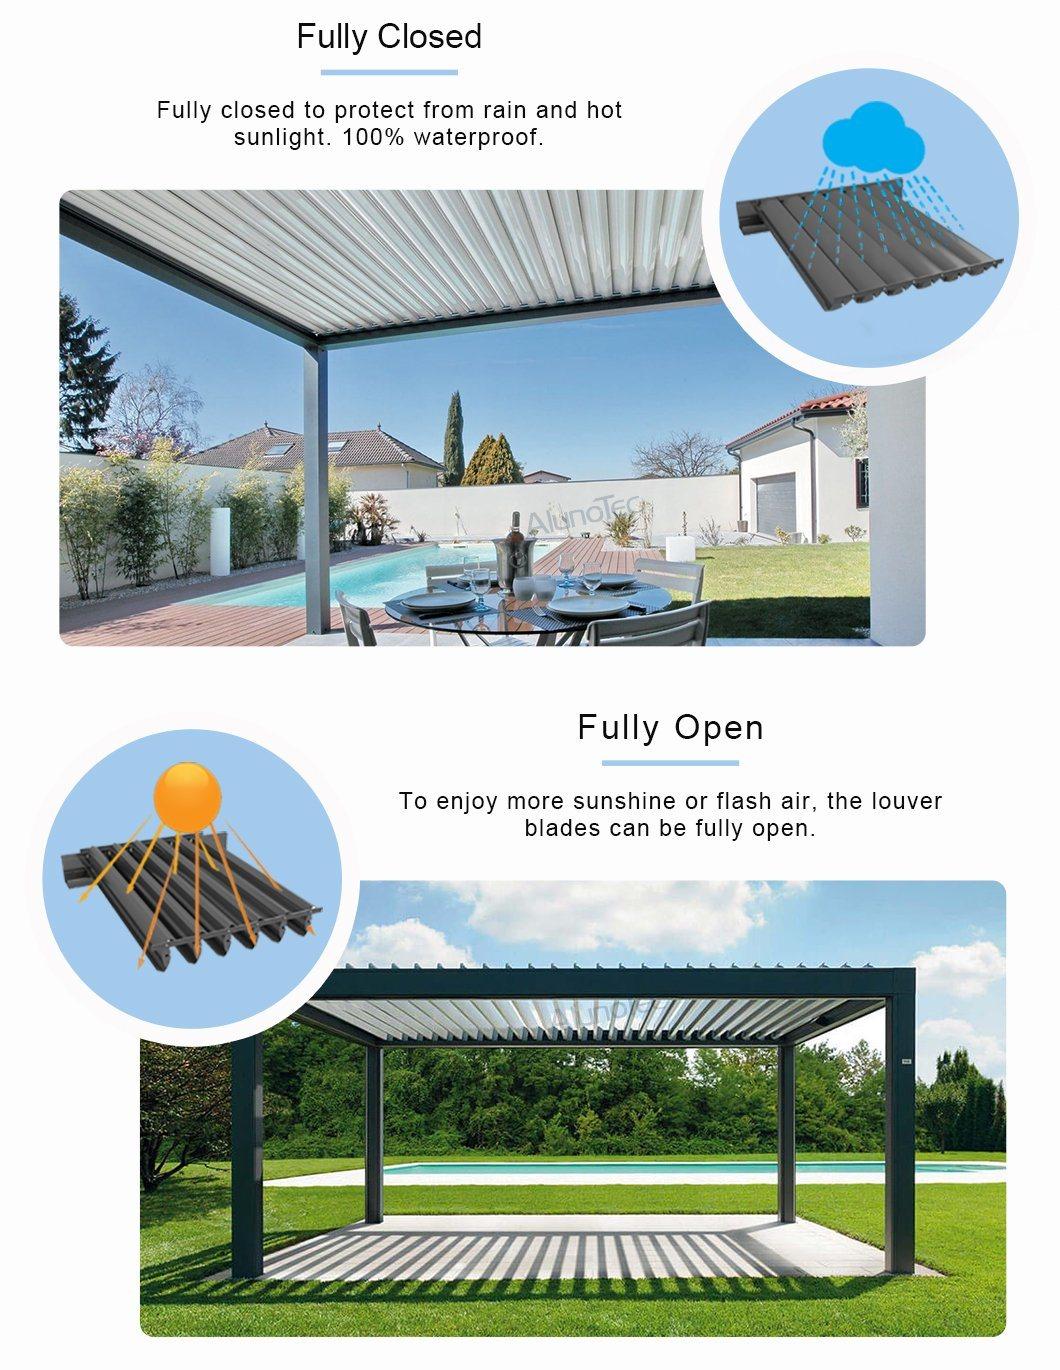 Quality Chinese Bioclimatic Pergola Louvered Roof for Barbecue